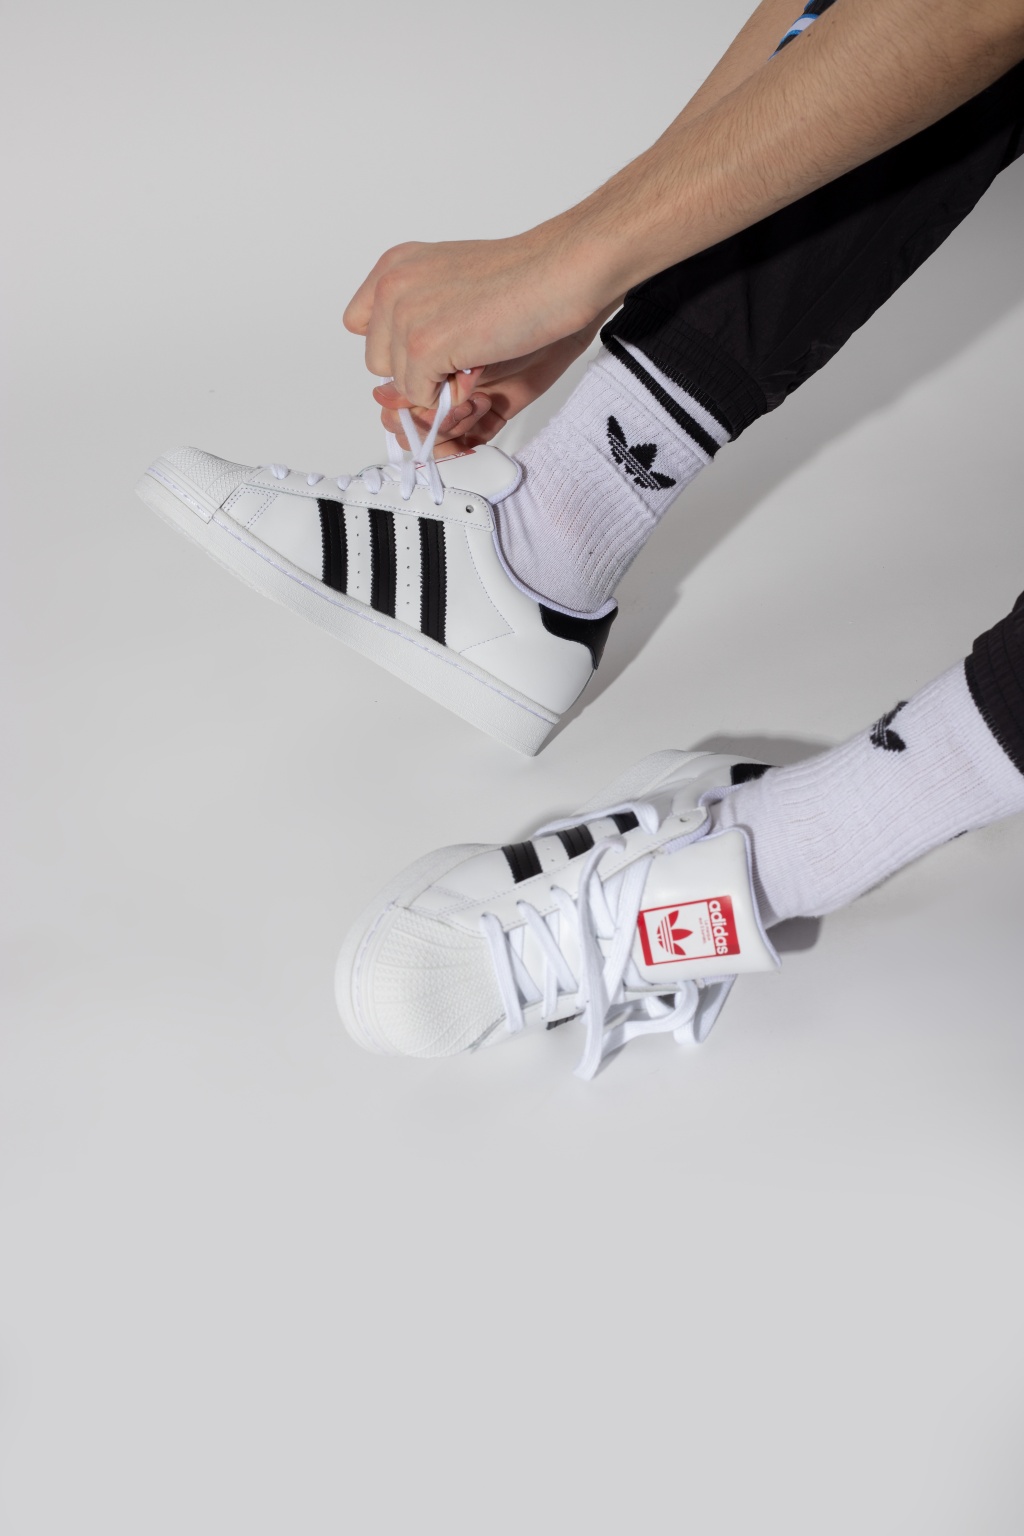 \'Superstar\' adidas | for size | sneakers IetpShops women business Shoes | ADIDAS Originals free Men\'s cards full